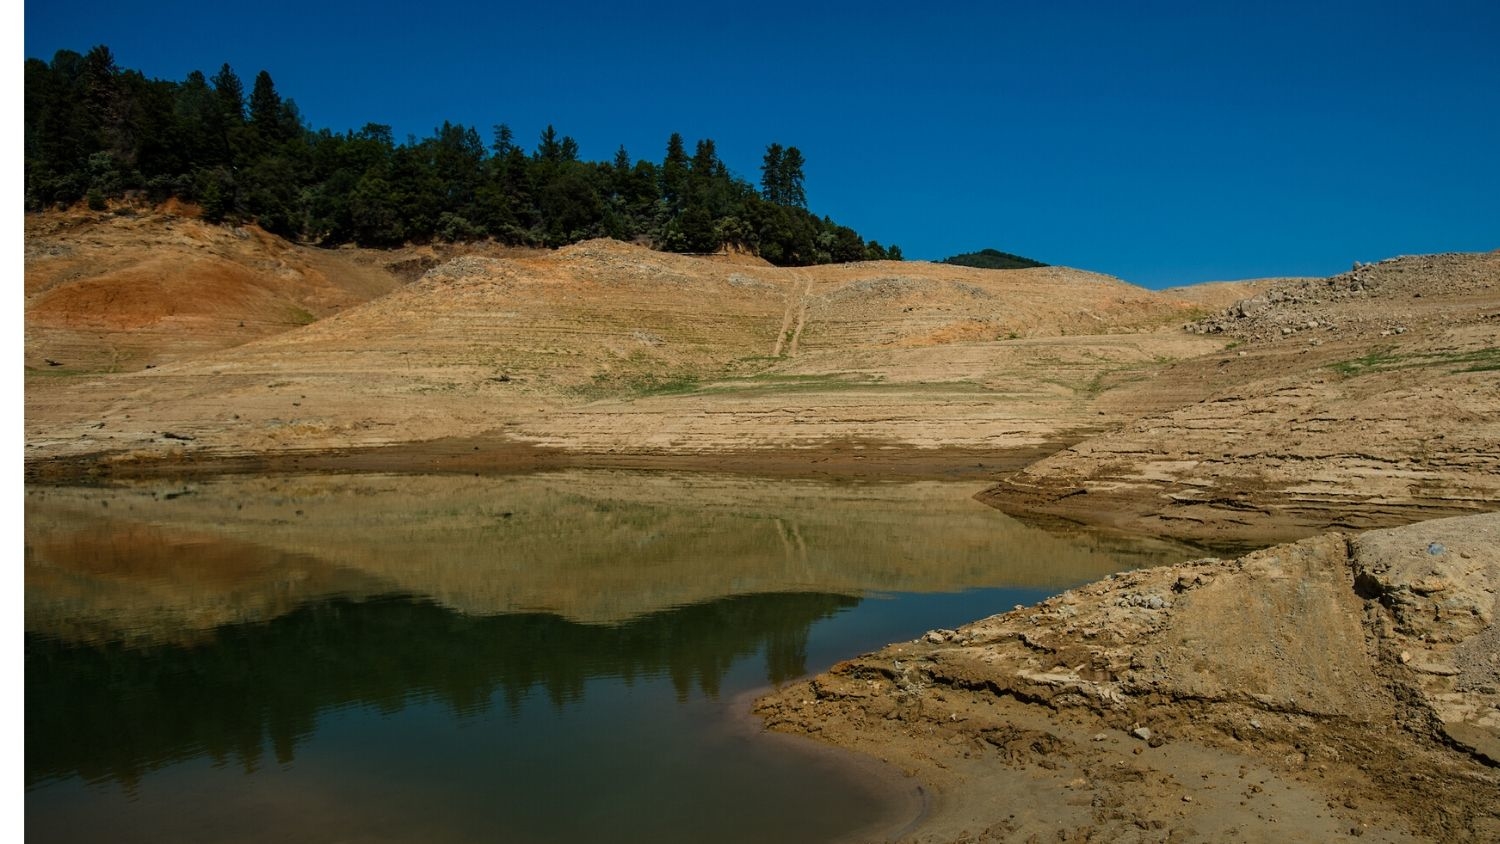 Shasta Lake during a drought in California - How A Historic Drought Led to Higher Power Costs and Emissions - Forestry and Environmental Resources NC State University